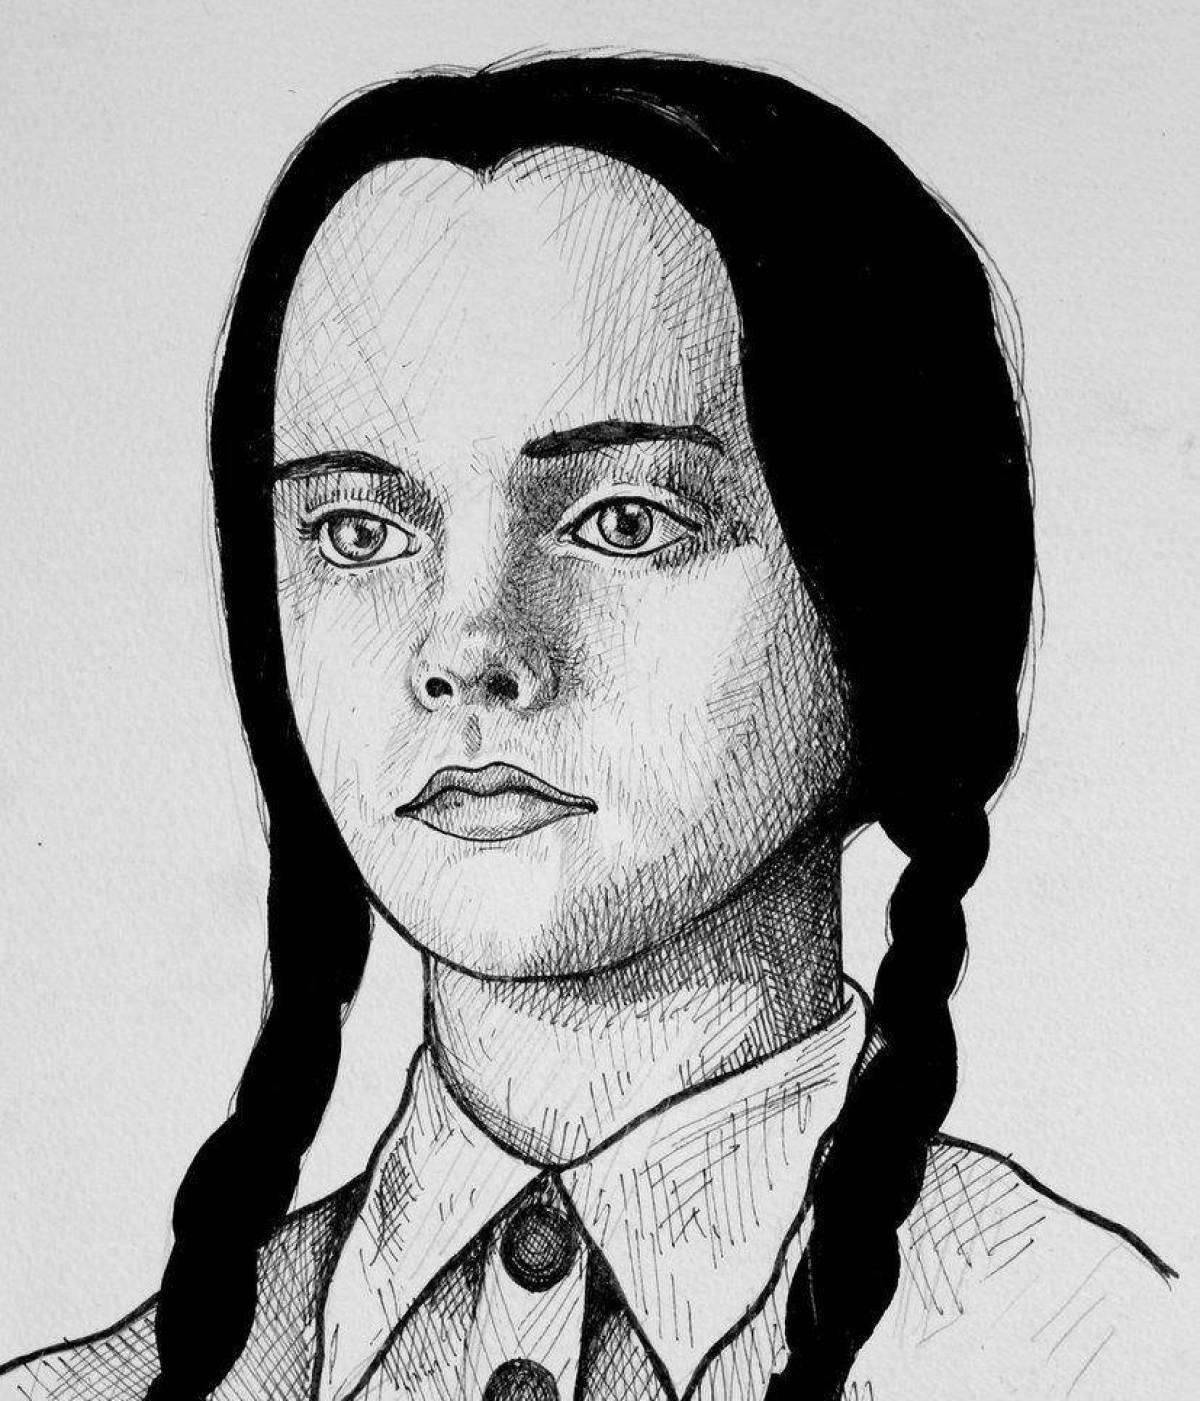 Wednesday Addams from series #7